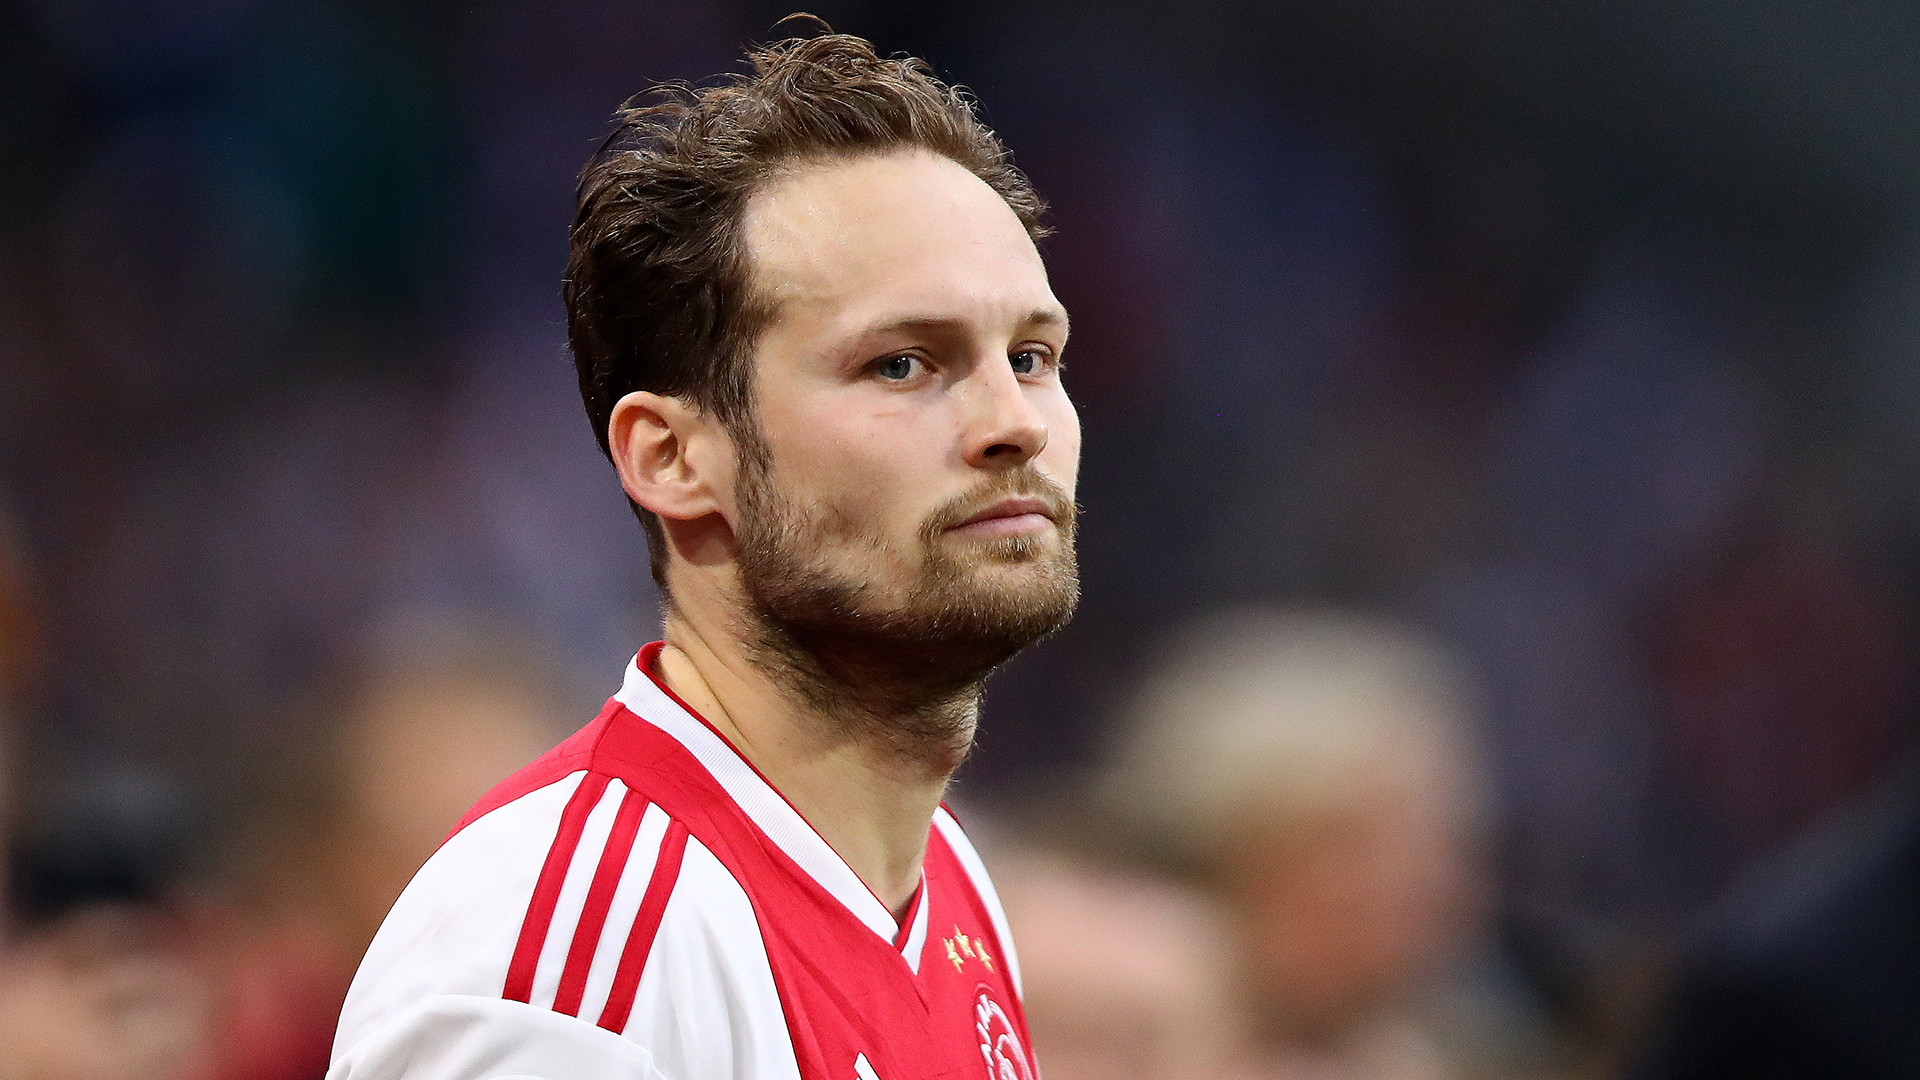 Top 5: Cầu thủ DALEY BLIND